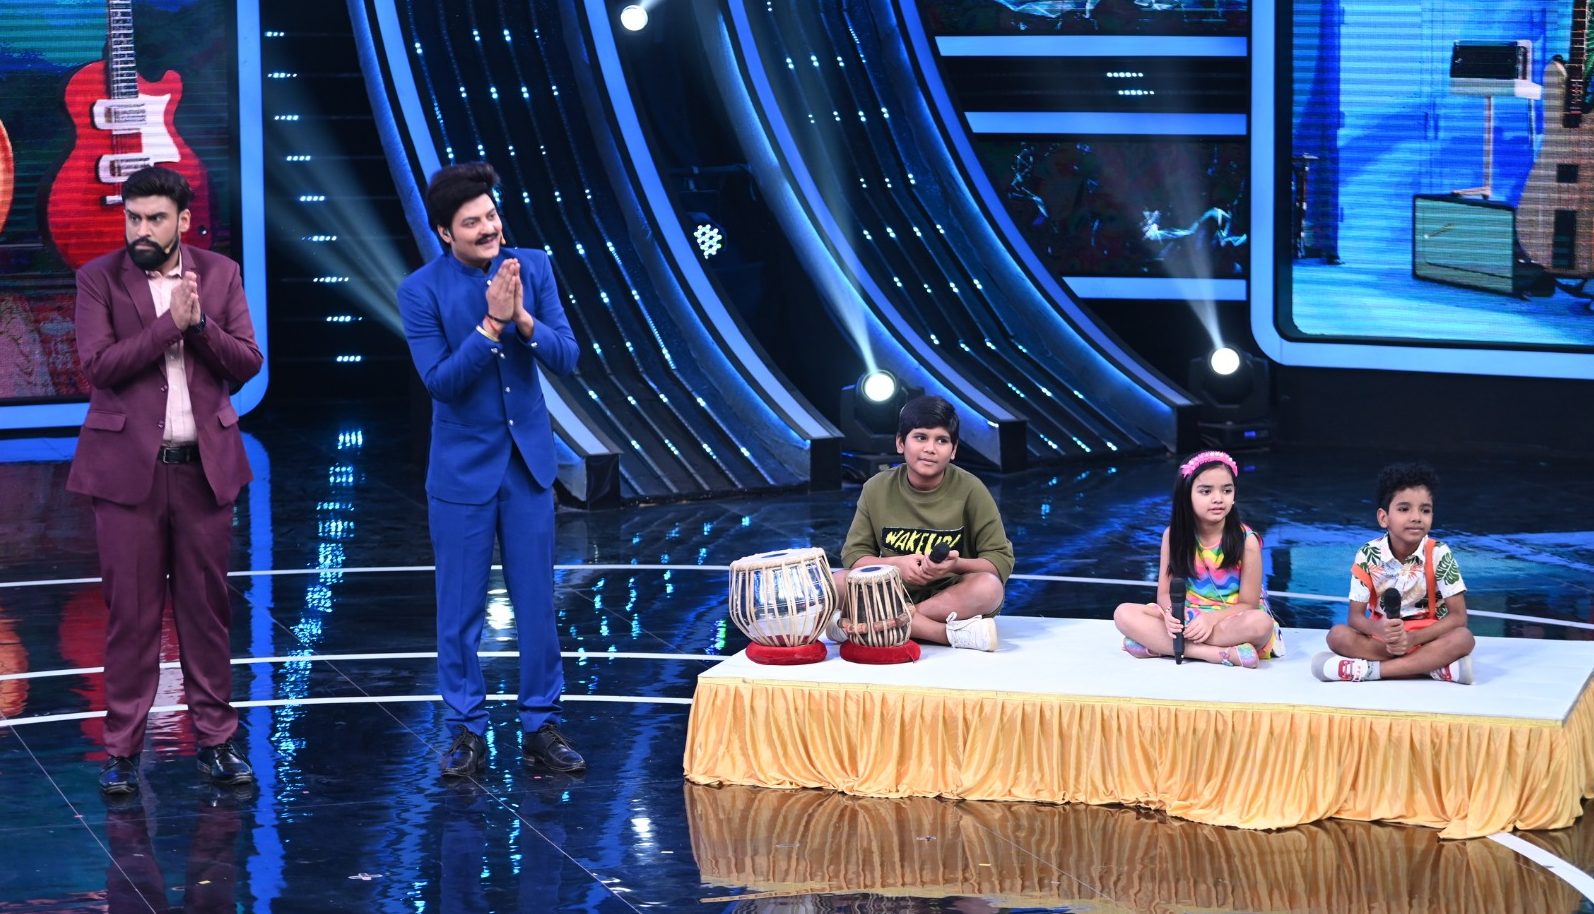 Watch ‘Musical Comedy’ on Sony Entertainment Television!